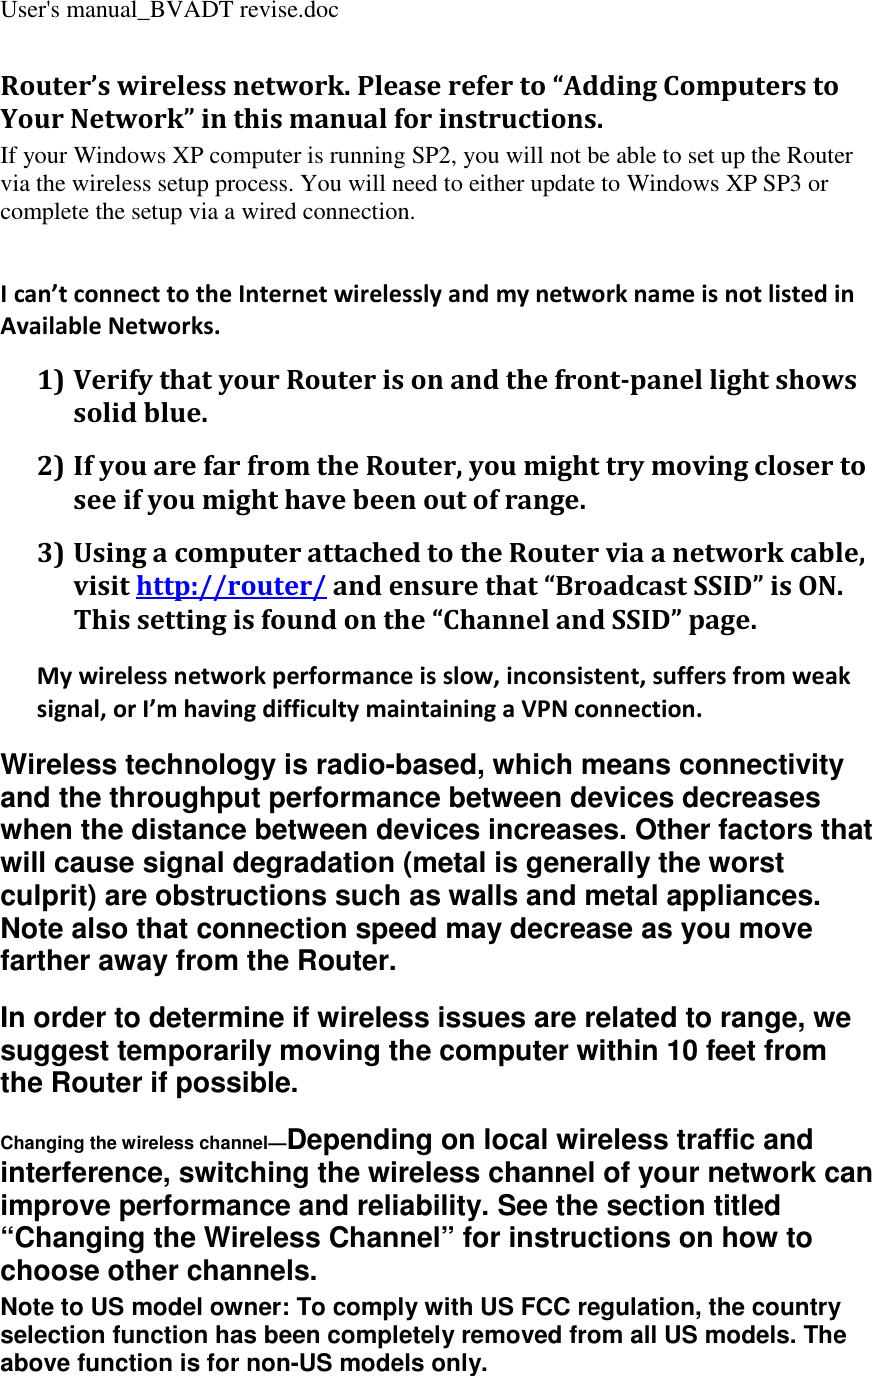 User&apos;s manual_BVADT revise.doc Router’s wireless network. Please refer to “Adding Computers to Your Network” in this manual for instructions. If your Windows XP computer is running SP2, you will not be able to set up the Router via the wireless setup process. You will need to either update to Windows XP SP3 or complete the setup via a wired connection.    I can’t connect to the Internet wirelessly and my network name is not listed in Available Networks. 1) Verify that your Router is on and the front-panel light shows solid blue. 2) If you are far from the Router, you might try moving closer to see if you might have been out of range. 3) Using a computer attached to the Router via a network cable, visit http://router/ and ensure that “Broadcast SSID” is ON. This setting is found on the “Channel and SSID” page. My wireless network performance is slow, inconsistent, suffers from weak signal, or I’m having difficulty maintaining a VPN connection. Wireless technology is radio-based, which means connectivity and the throughput performance between devices decreases when the distance between devices increases. Other factors that will cause signal degradation (metal is generally the worst culprit) are obstructions such as walls and metal appliances. Note also that connection speed may decrease as you move farther away from the Router. In order to determine if wireless issues are related to range, we suggest temporarily moving the computer within 10 feet from the Router if possible. Changing the wireless channel—Depending on local wireless traffic and interference, switching the wireless channel of your network can improve performance and reliability. See the section titled “Changing the Wireless Channel” for instructions on how to choose other channels. Note to US model owner: To comply with US FCC regulation, the country selection function has been completely removed from all US models. The above function is for non-US models only. 